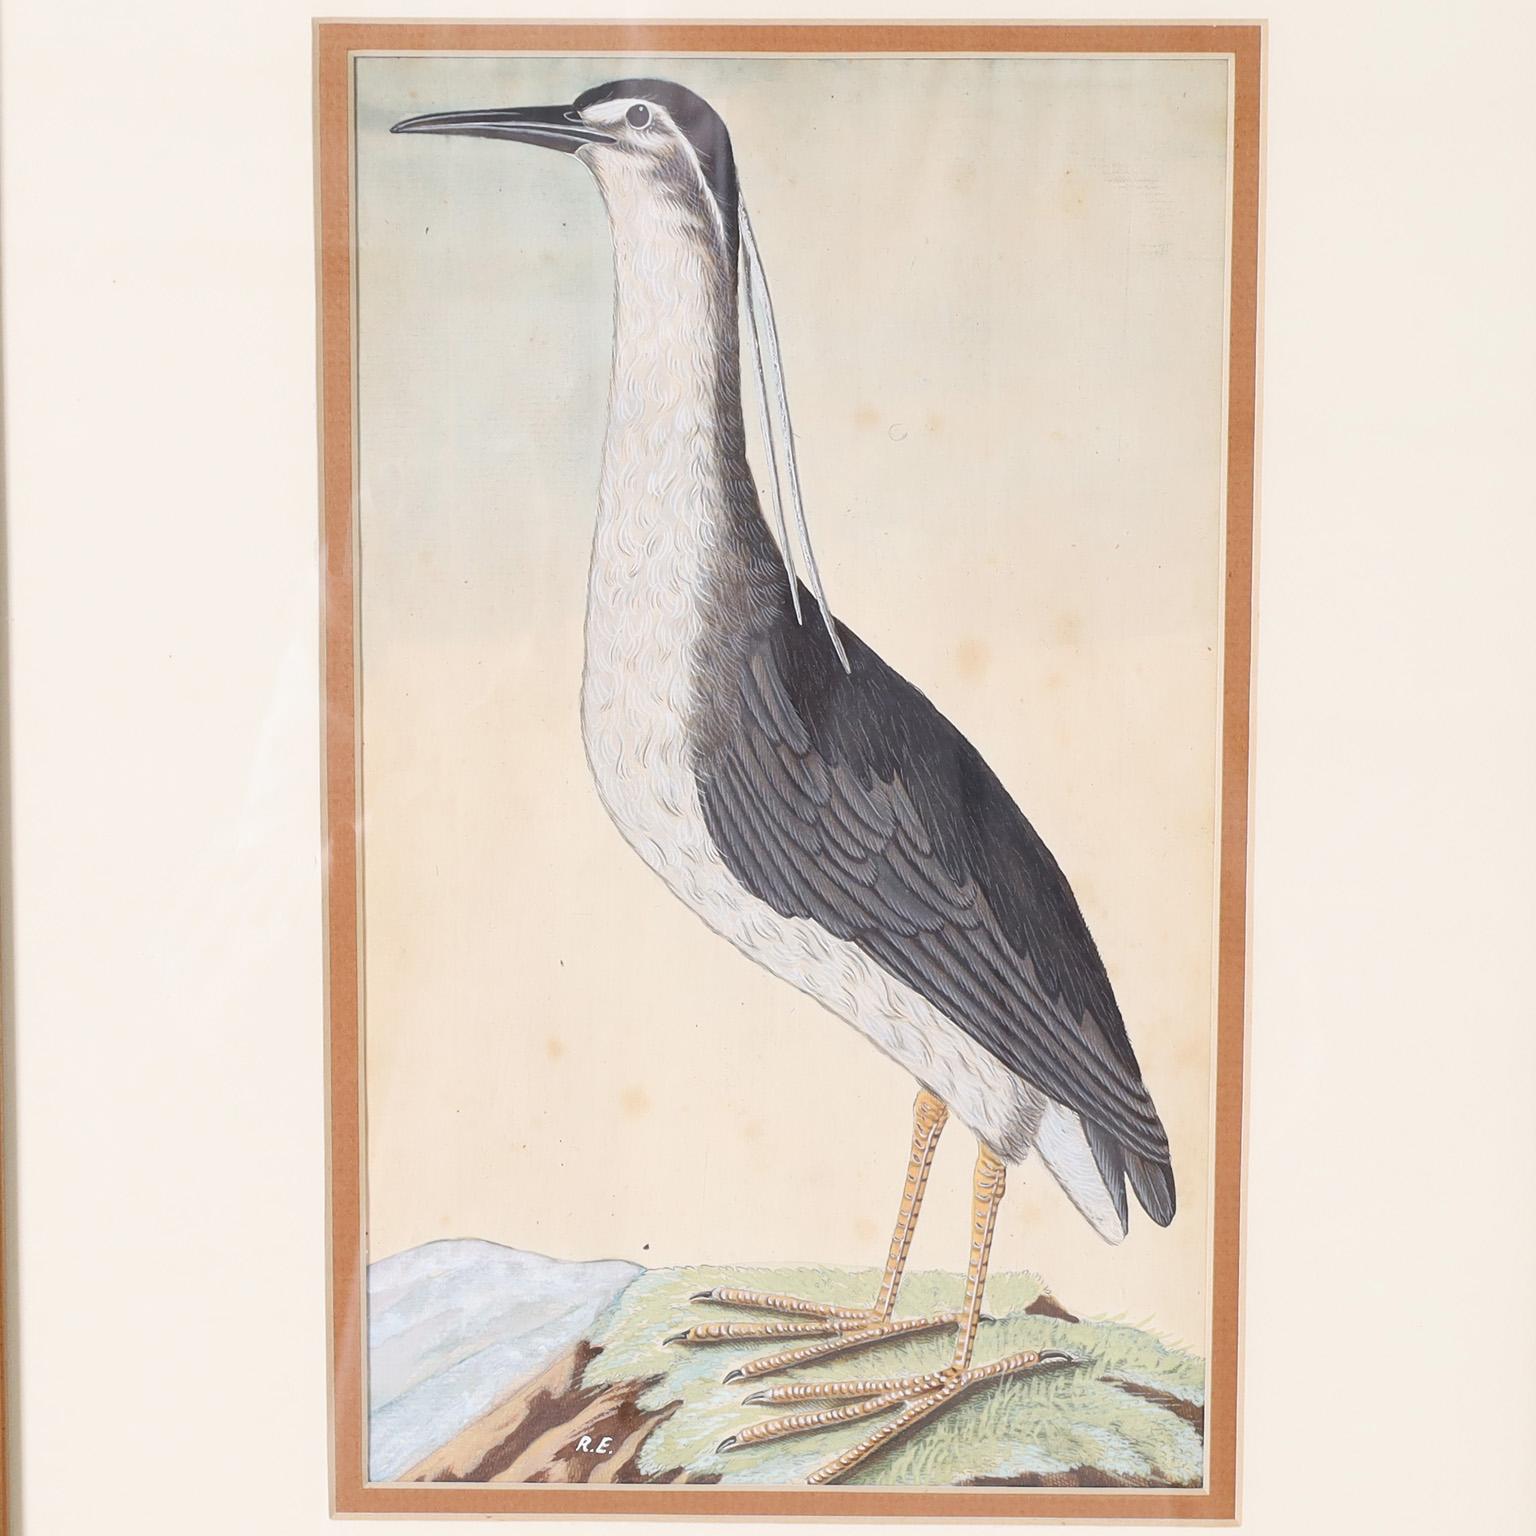 Watercolor Painting of a Night Heron - Art by Unknown